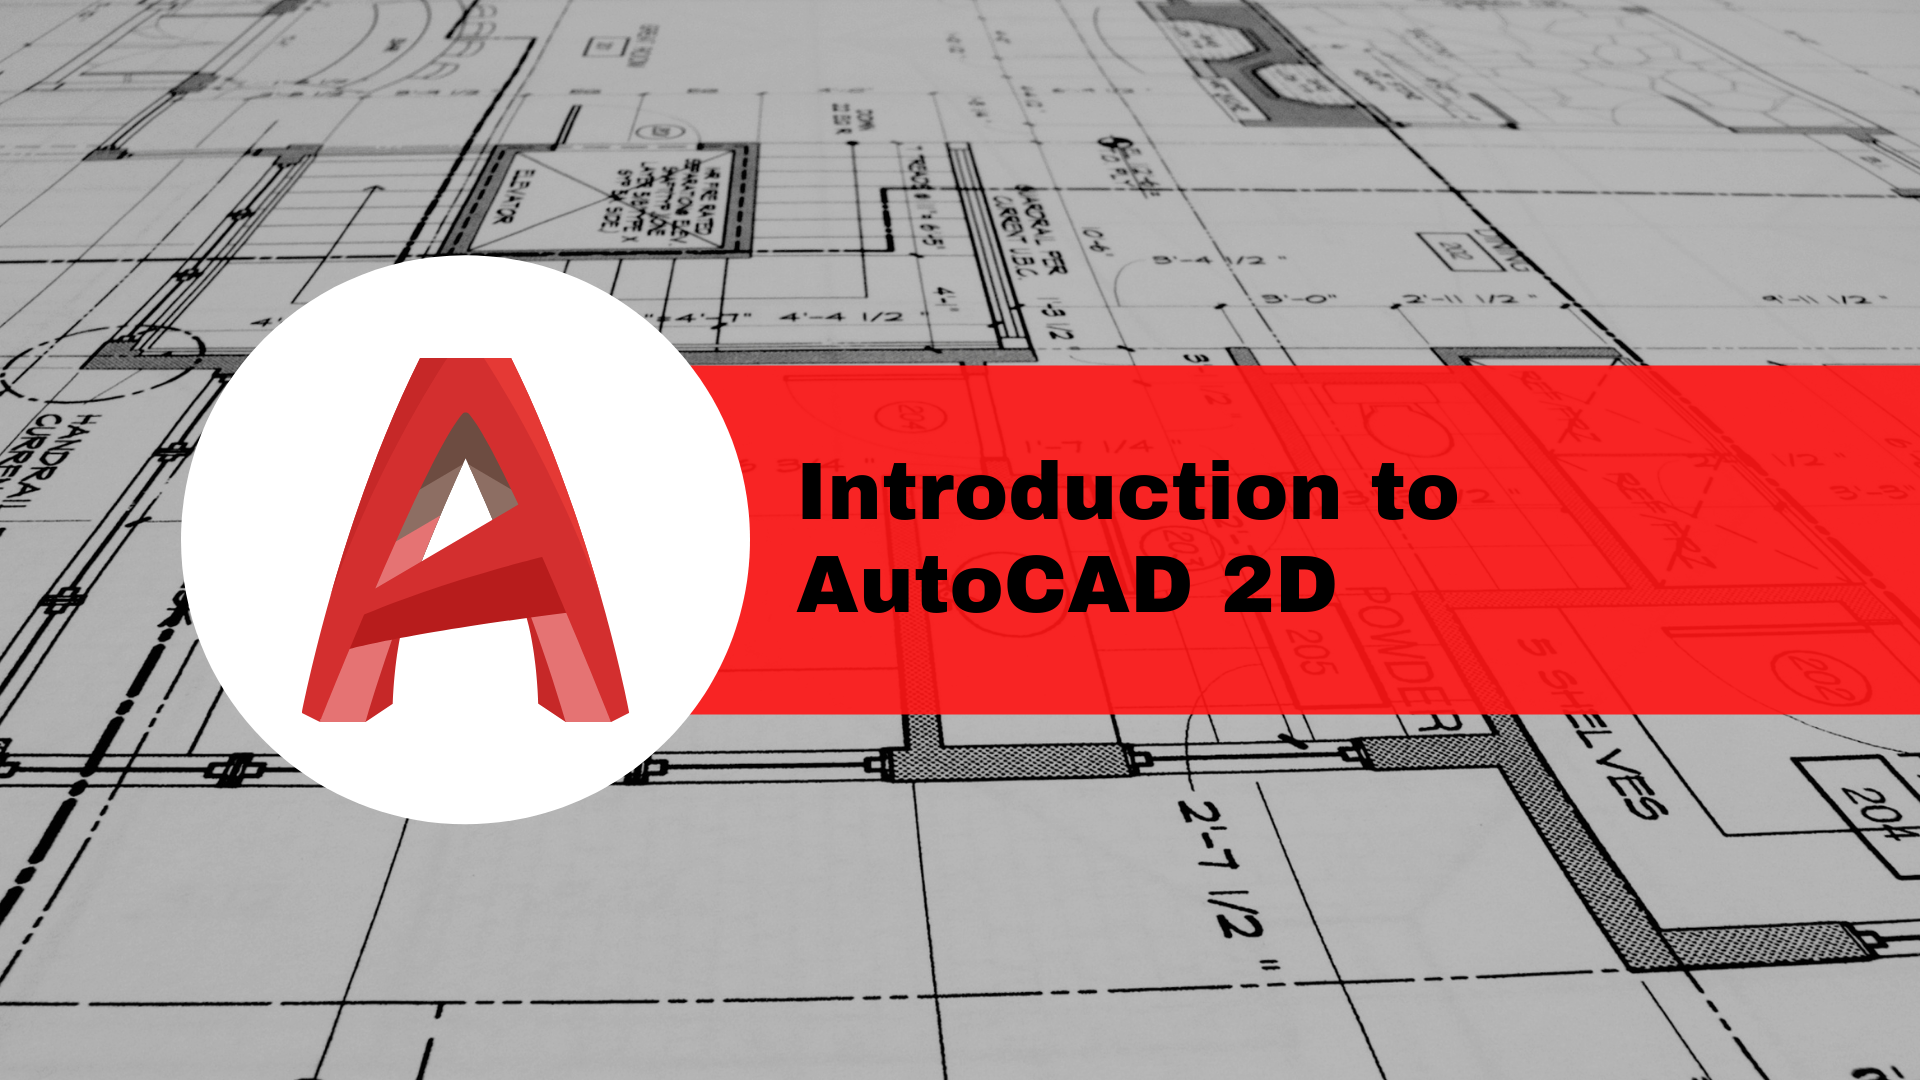 Introduction to AutoCAD 2D course image